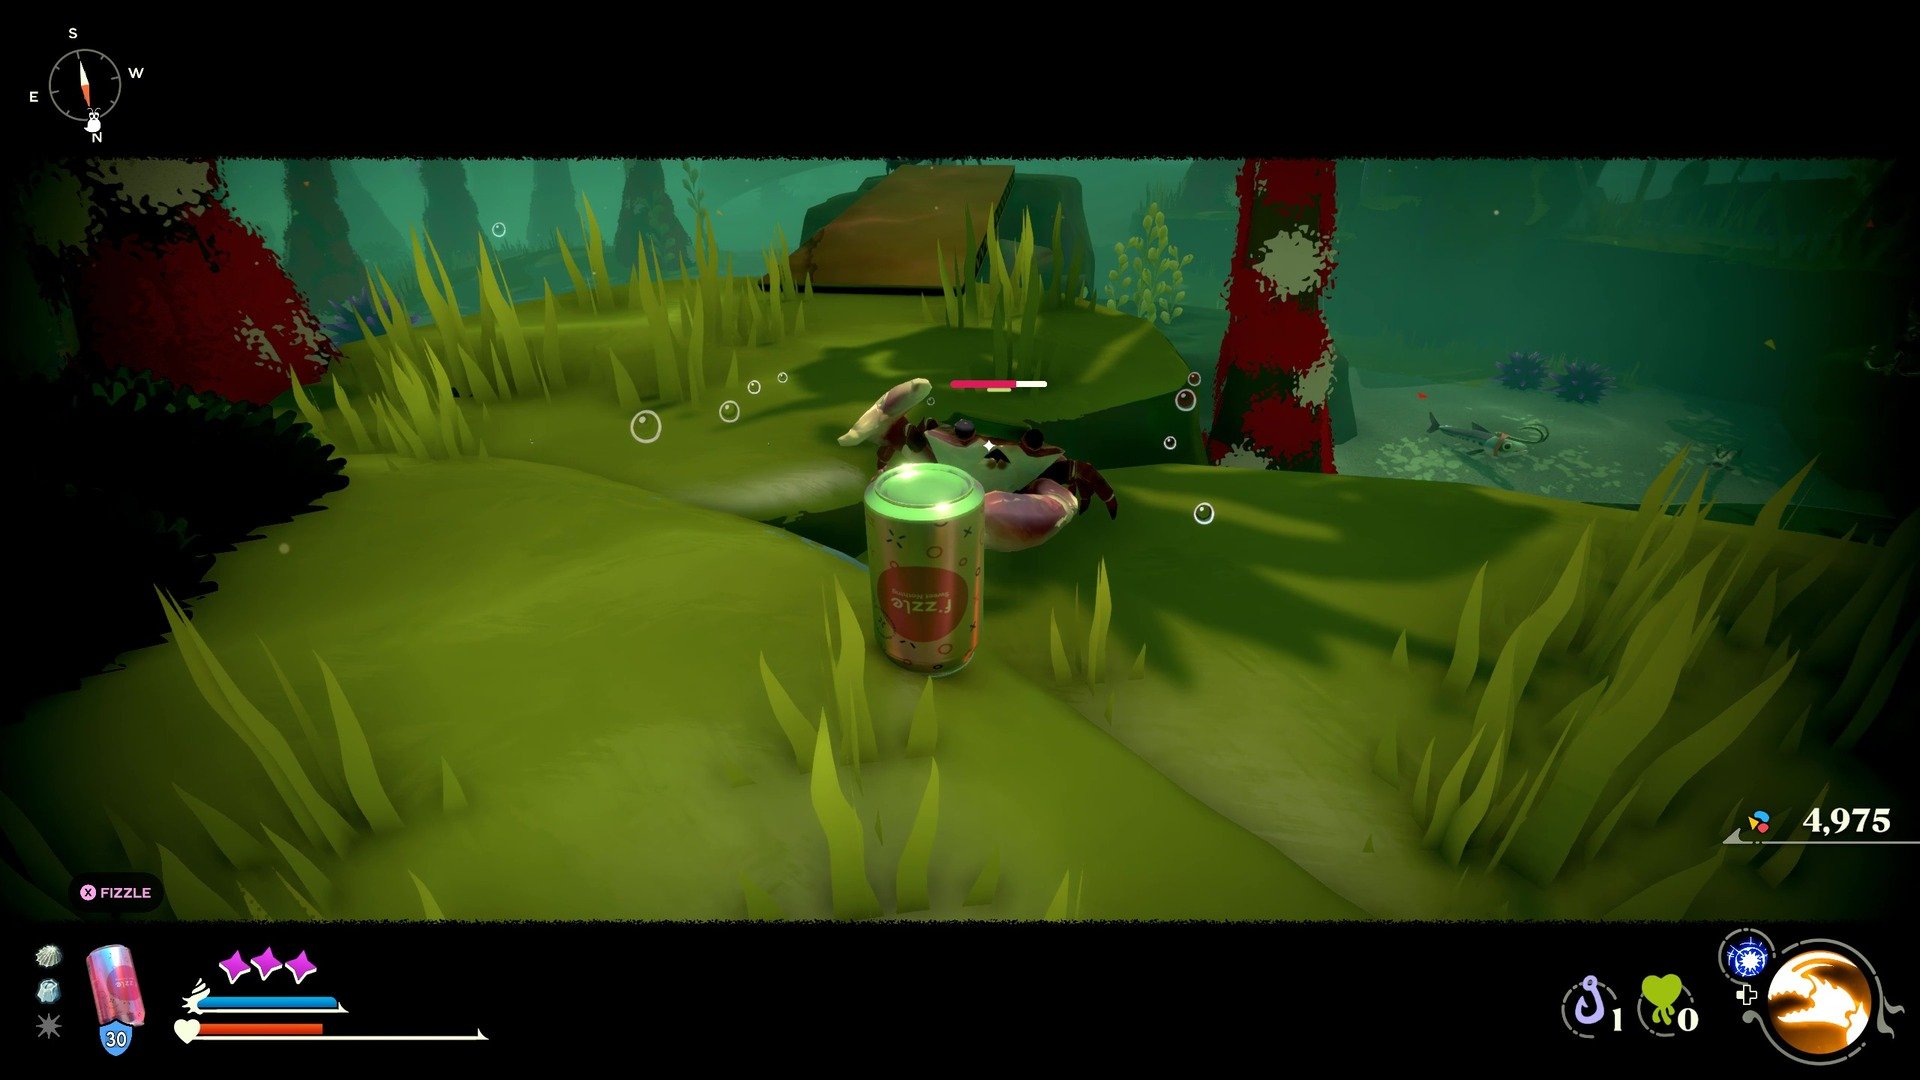 Kril about to block an enemy's attack by hiding in a soda can in Another Crab's Treasure